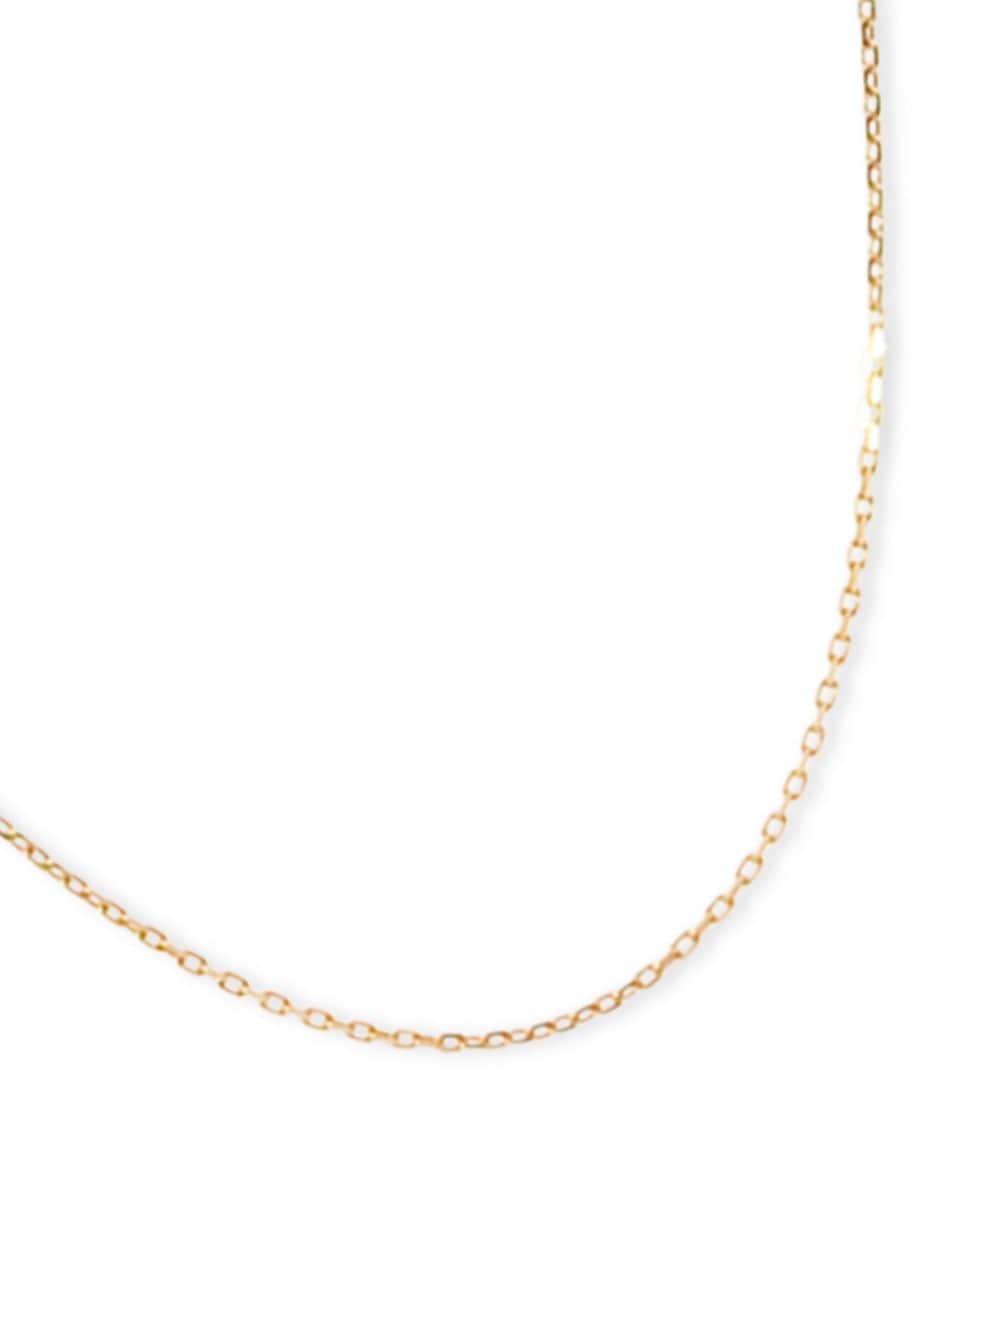 Shop The Alkemistry 18kt Recycled Yellow Gold Nude Shimmer Necklace